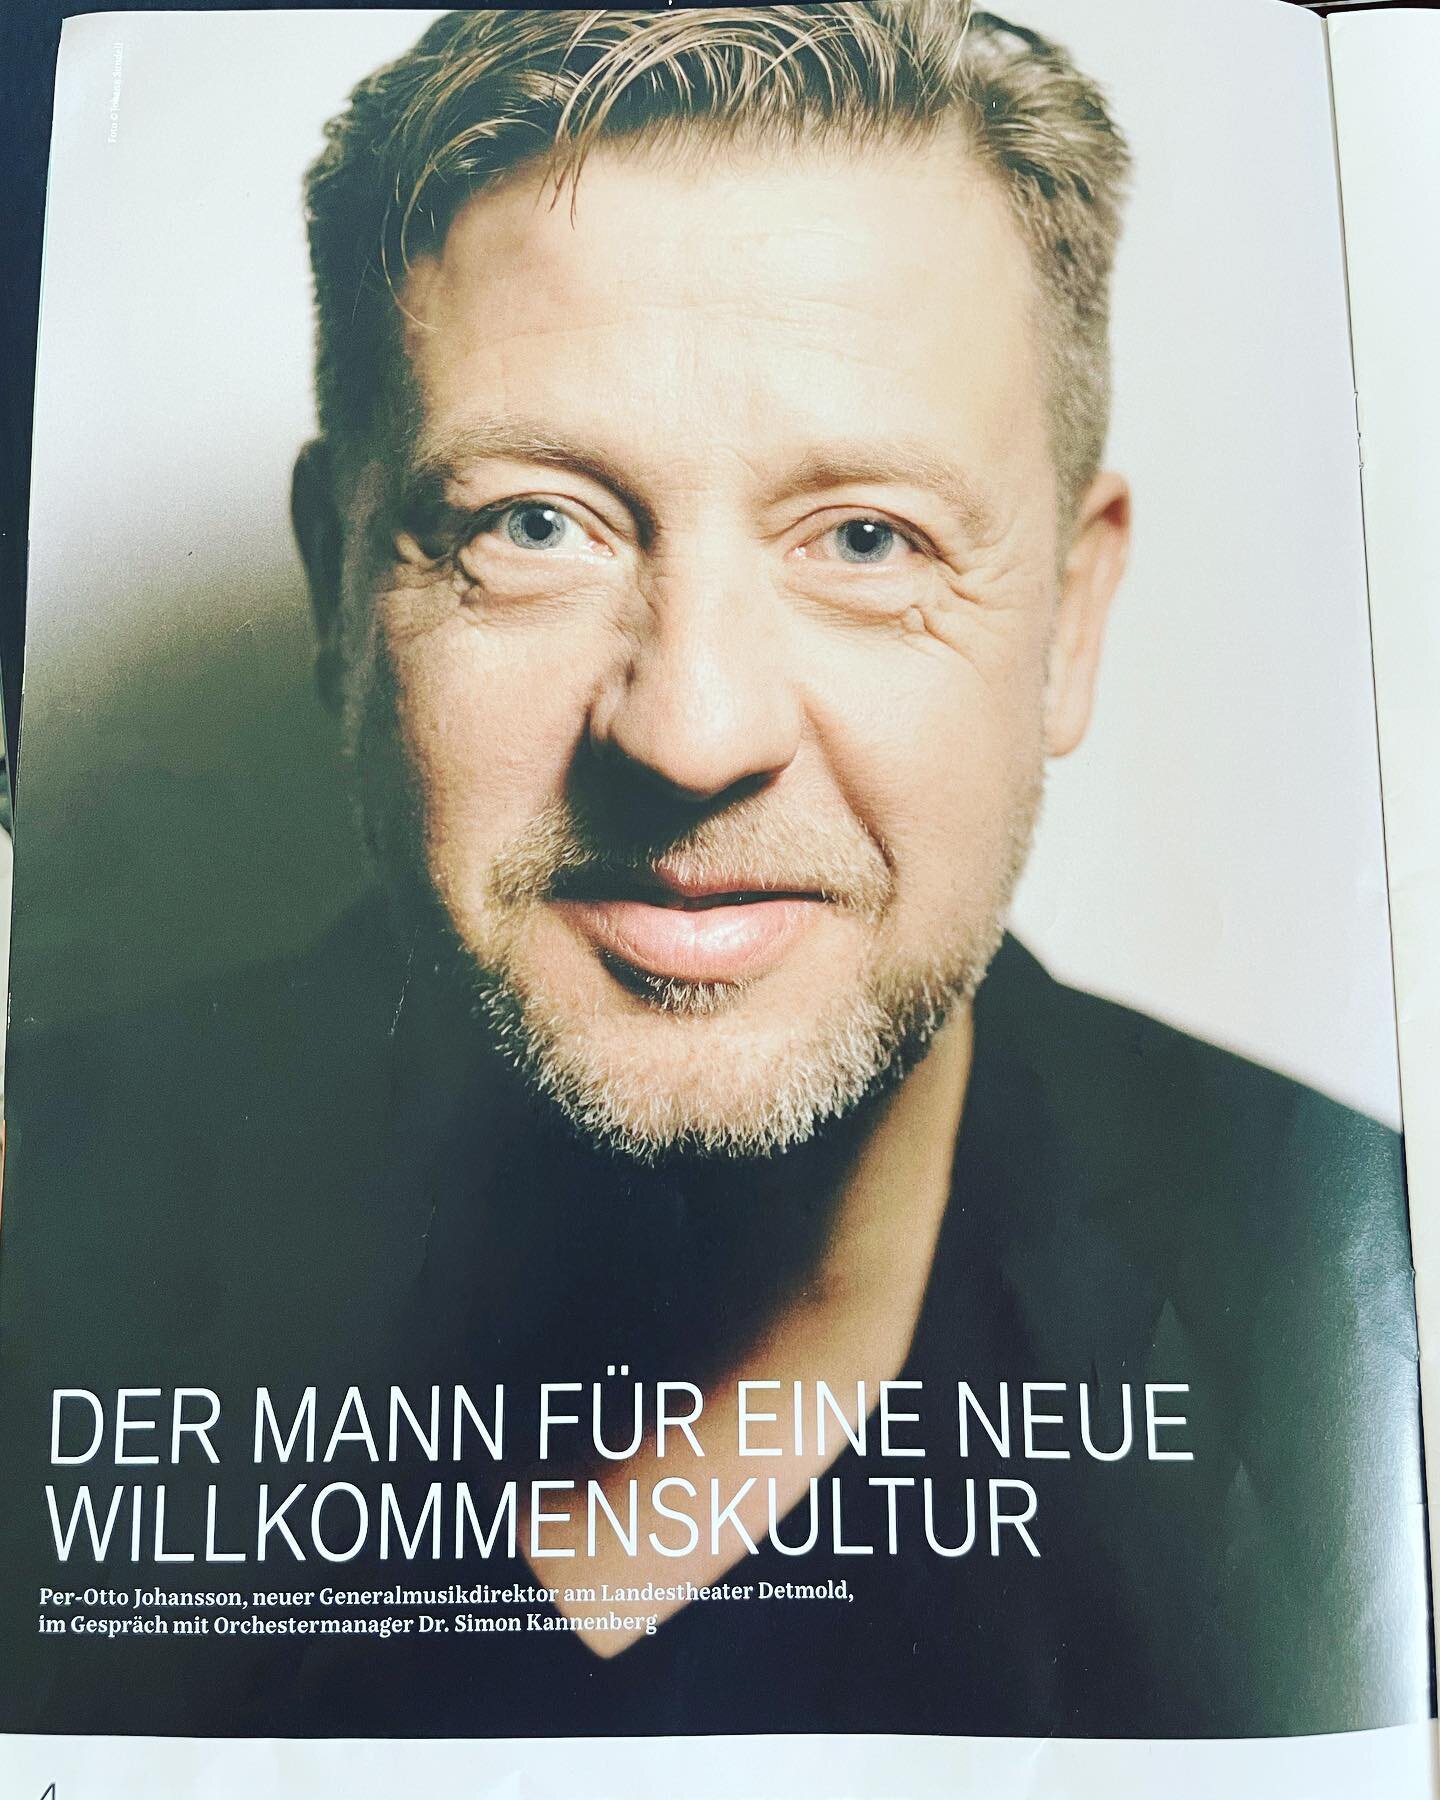 Happy to be part of this fantastic opera house @landestheaterdetmold with so much potential. @tidskriftenopera #conductor #opera #madamabutterfly @swedenabroad